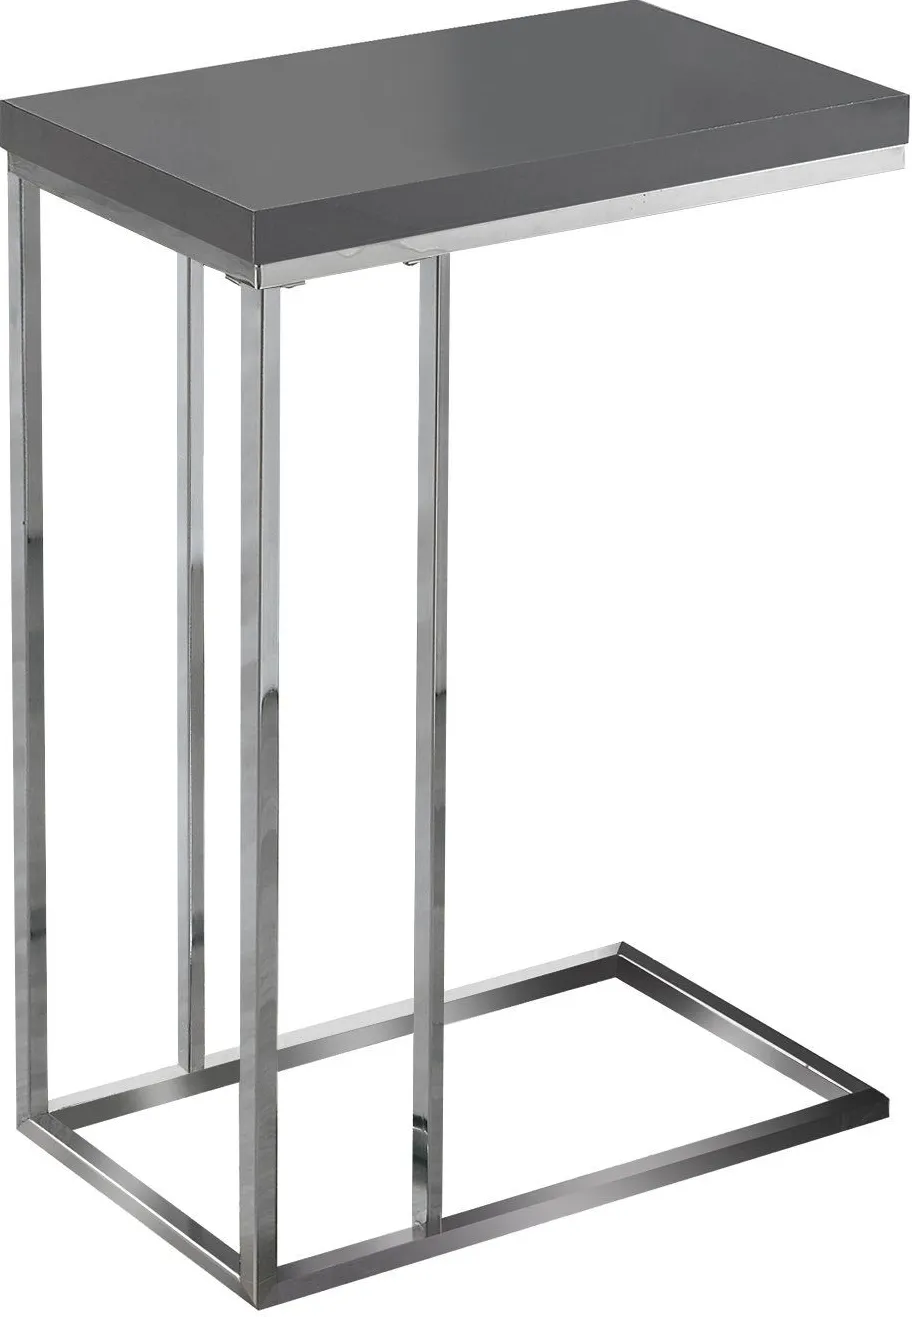 Accent Table, C-Shaped, End, Side, Snack, Living Room, Bedroom, Metal, Laminate, Glossy Grey, Chrome, Contemporary, Modern